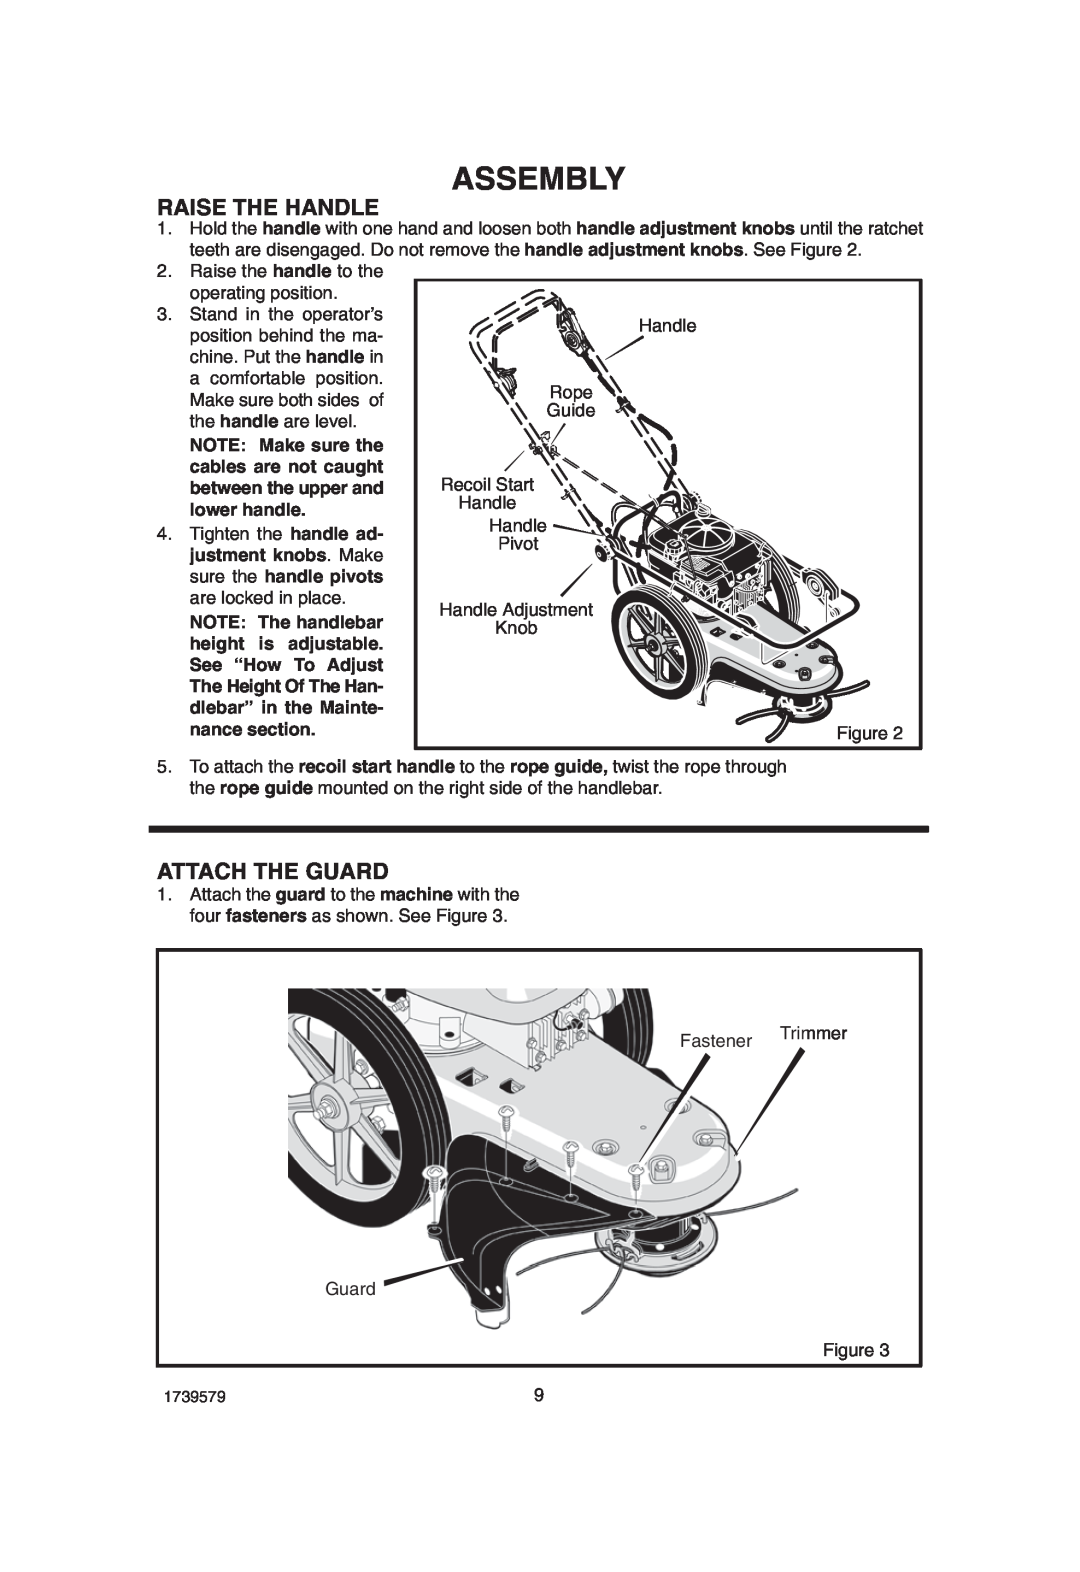 Hayter Mowers 407F manual Raise The Handle, Attach The Guard, Assembly 